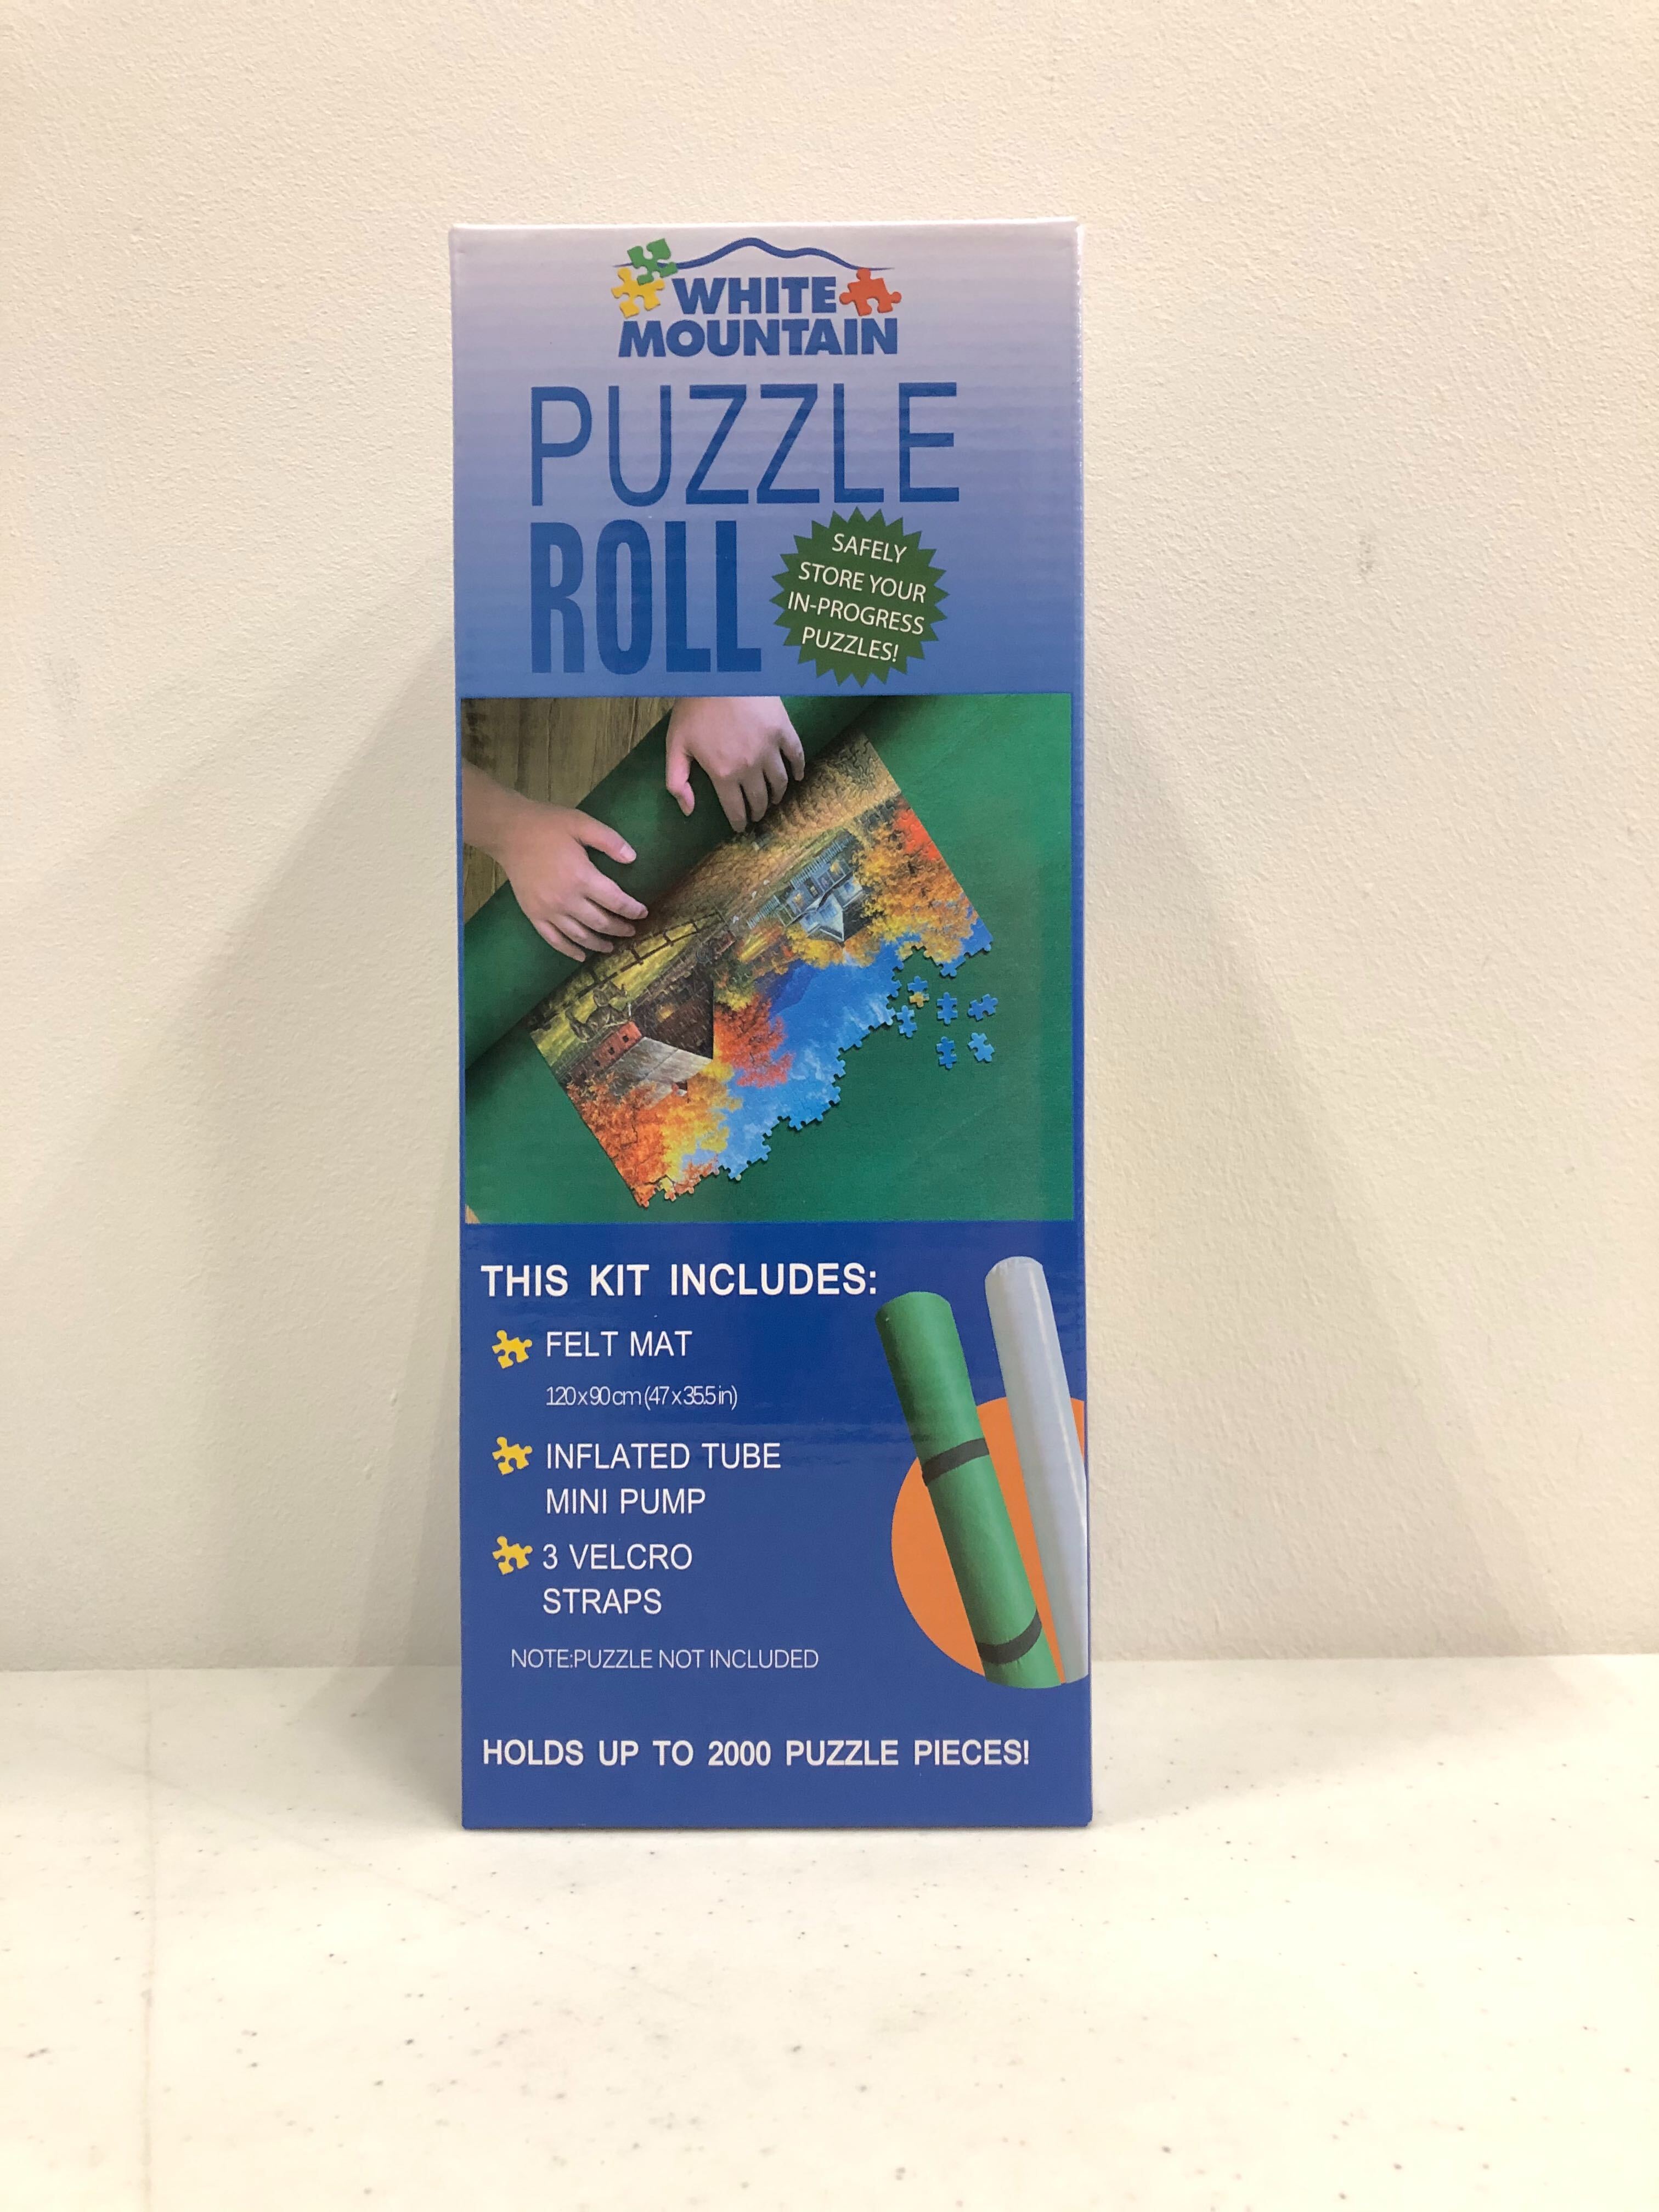 Puzzle Roll Up - 30x36